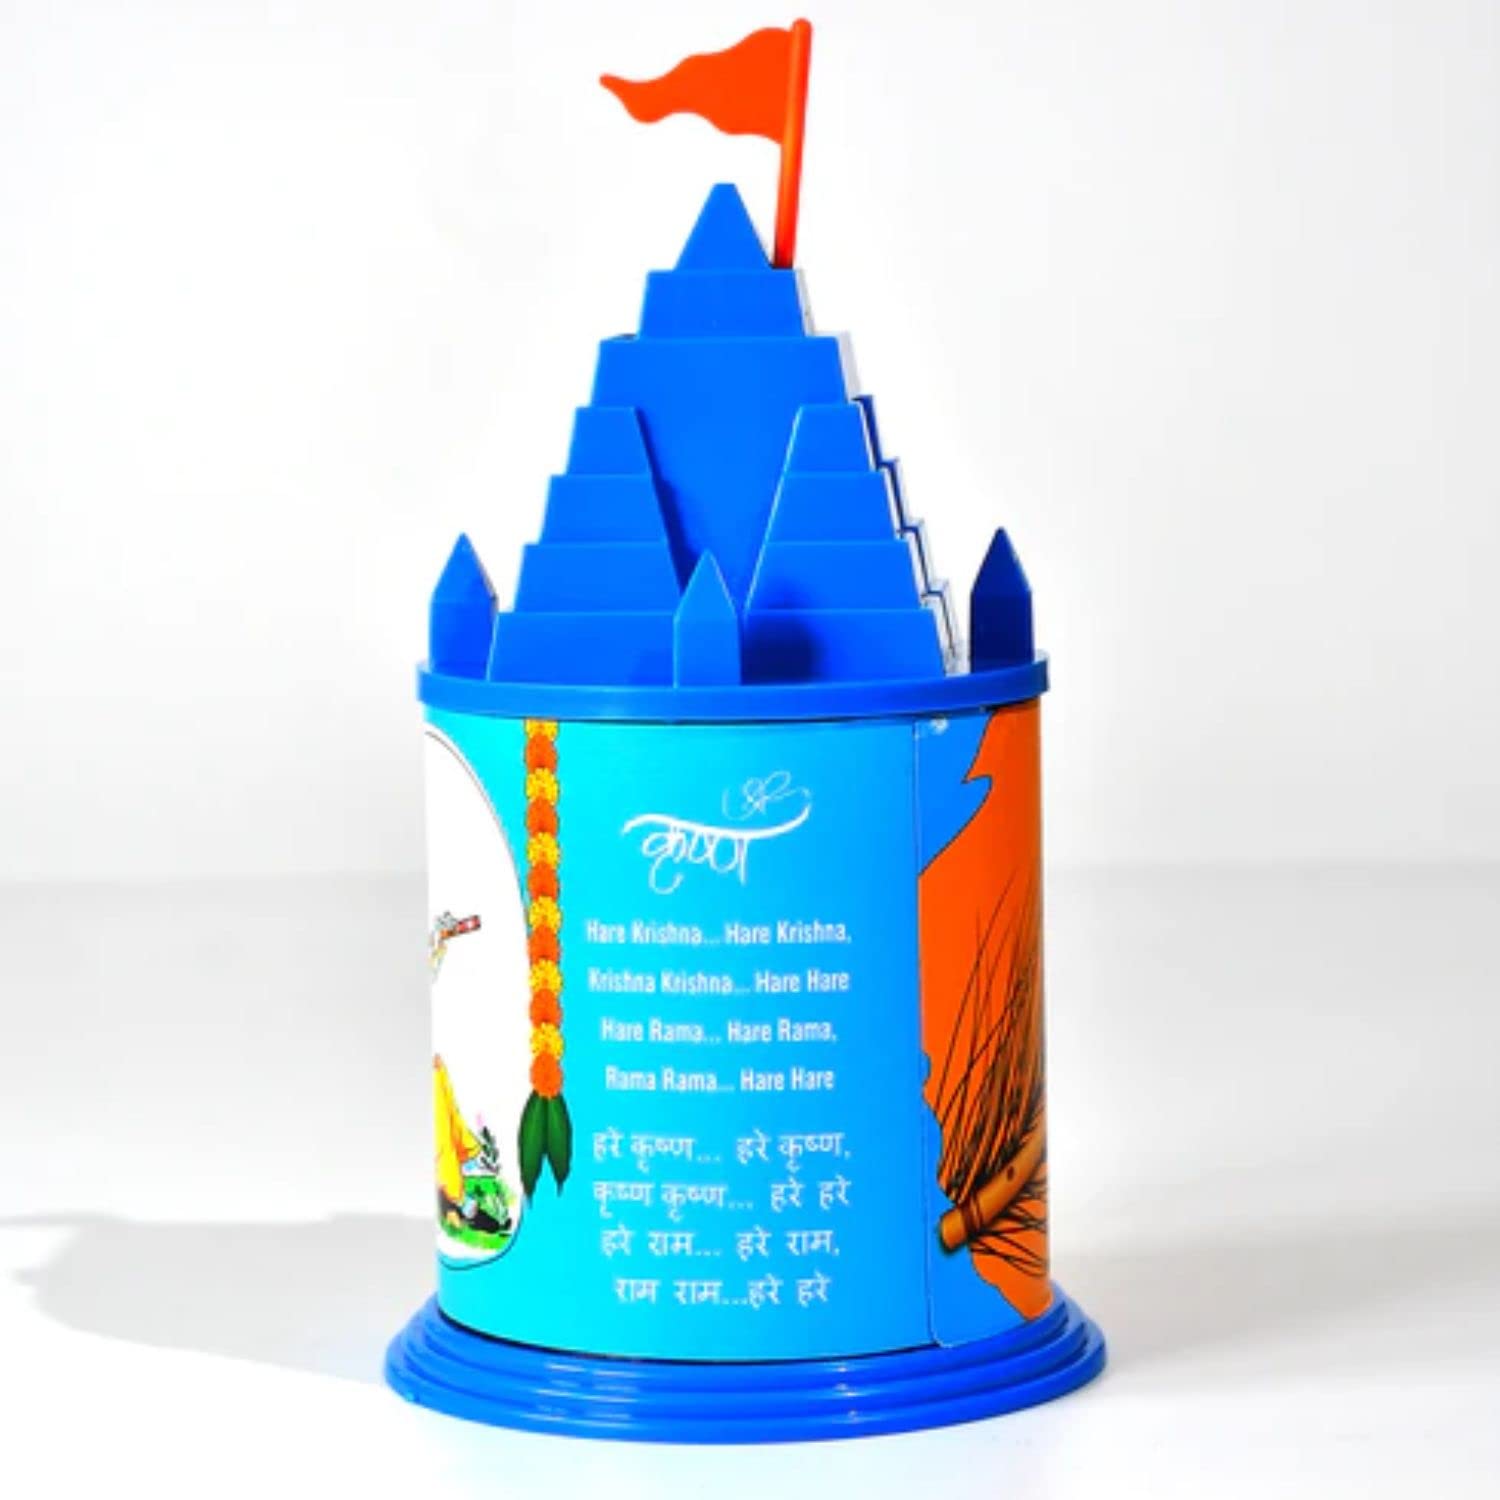 Kids Mandi temple shape coin bank for kids and adults.